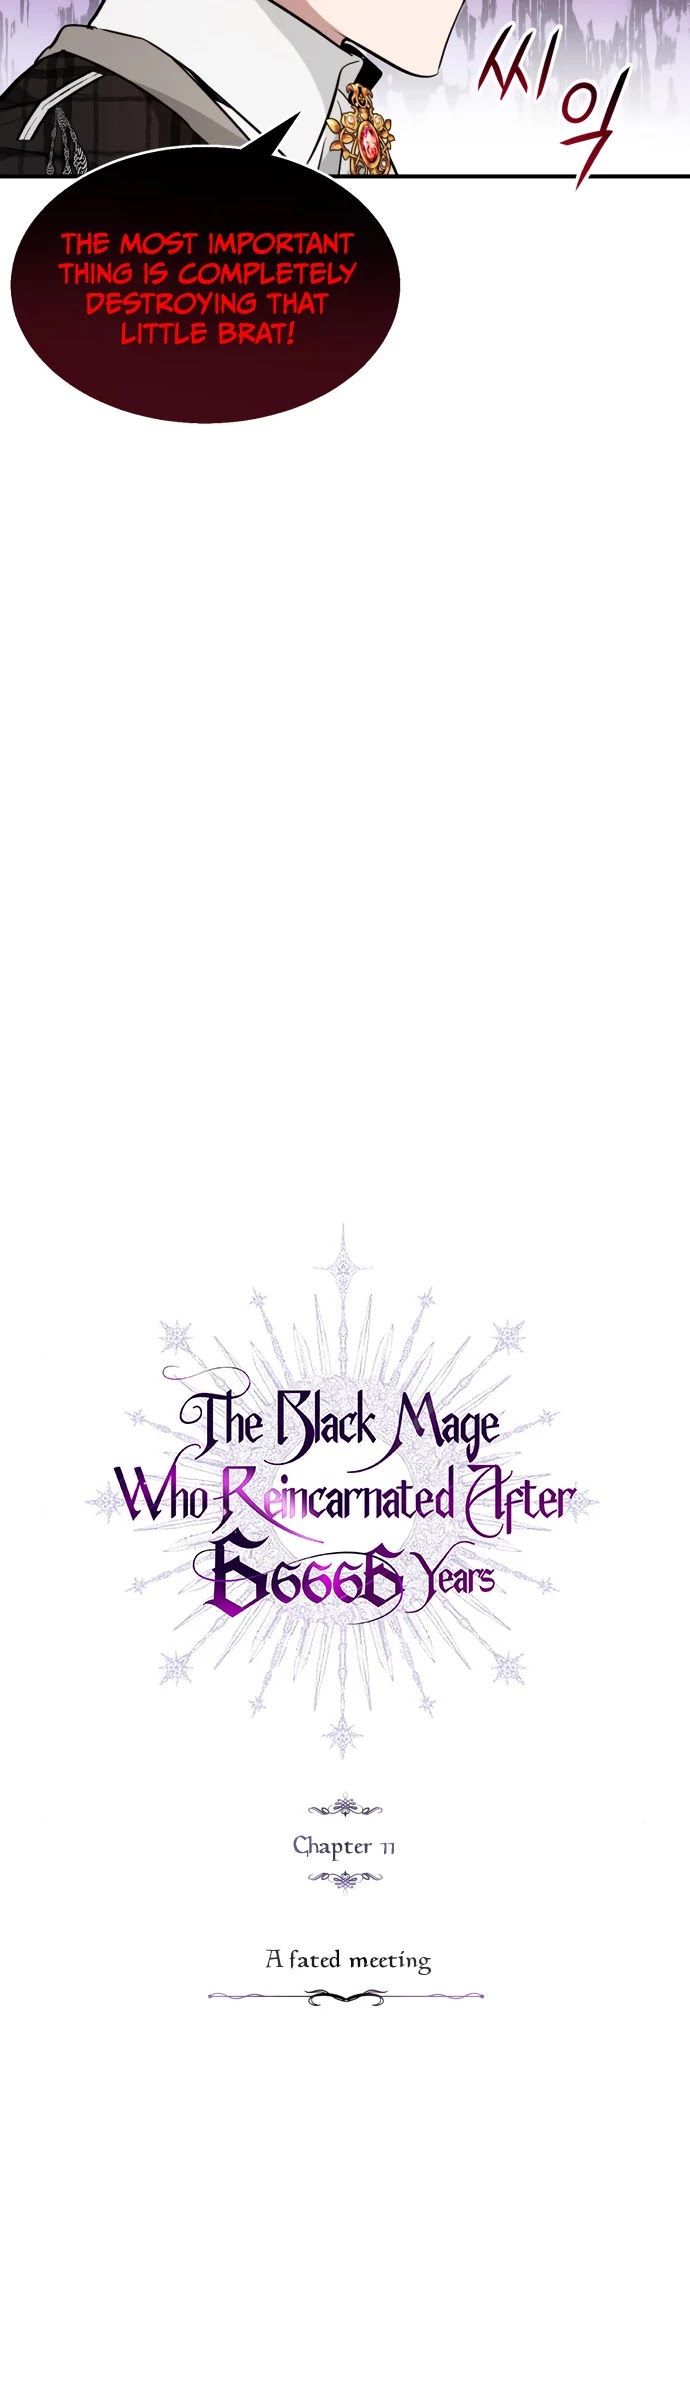 Reincarnated Into A Warlock 66,666 Years Later chapter 11 - page 8